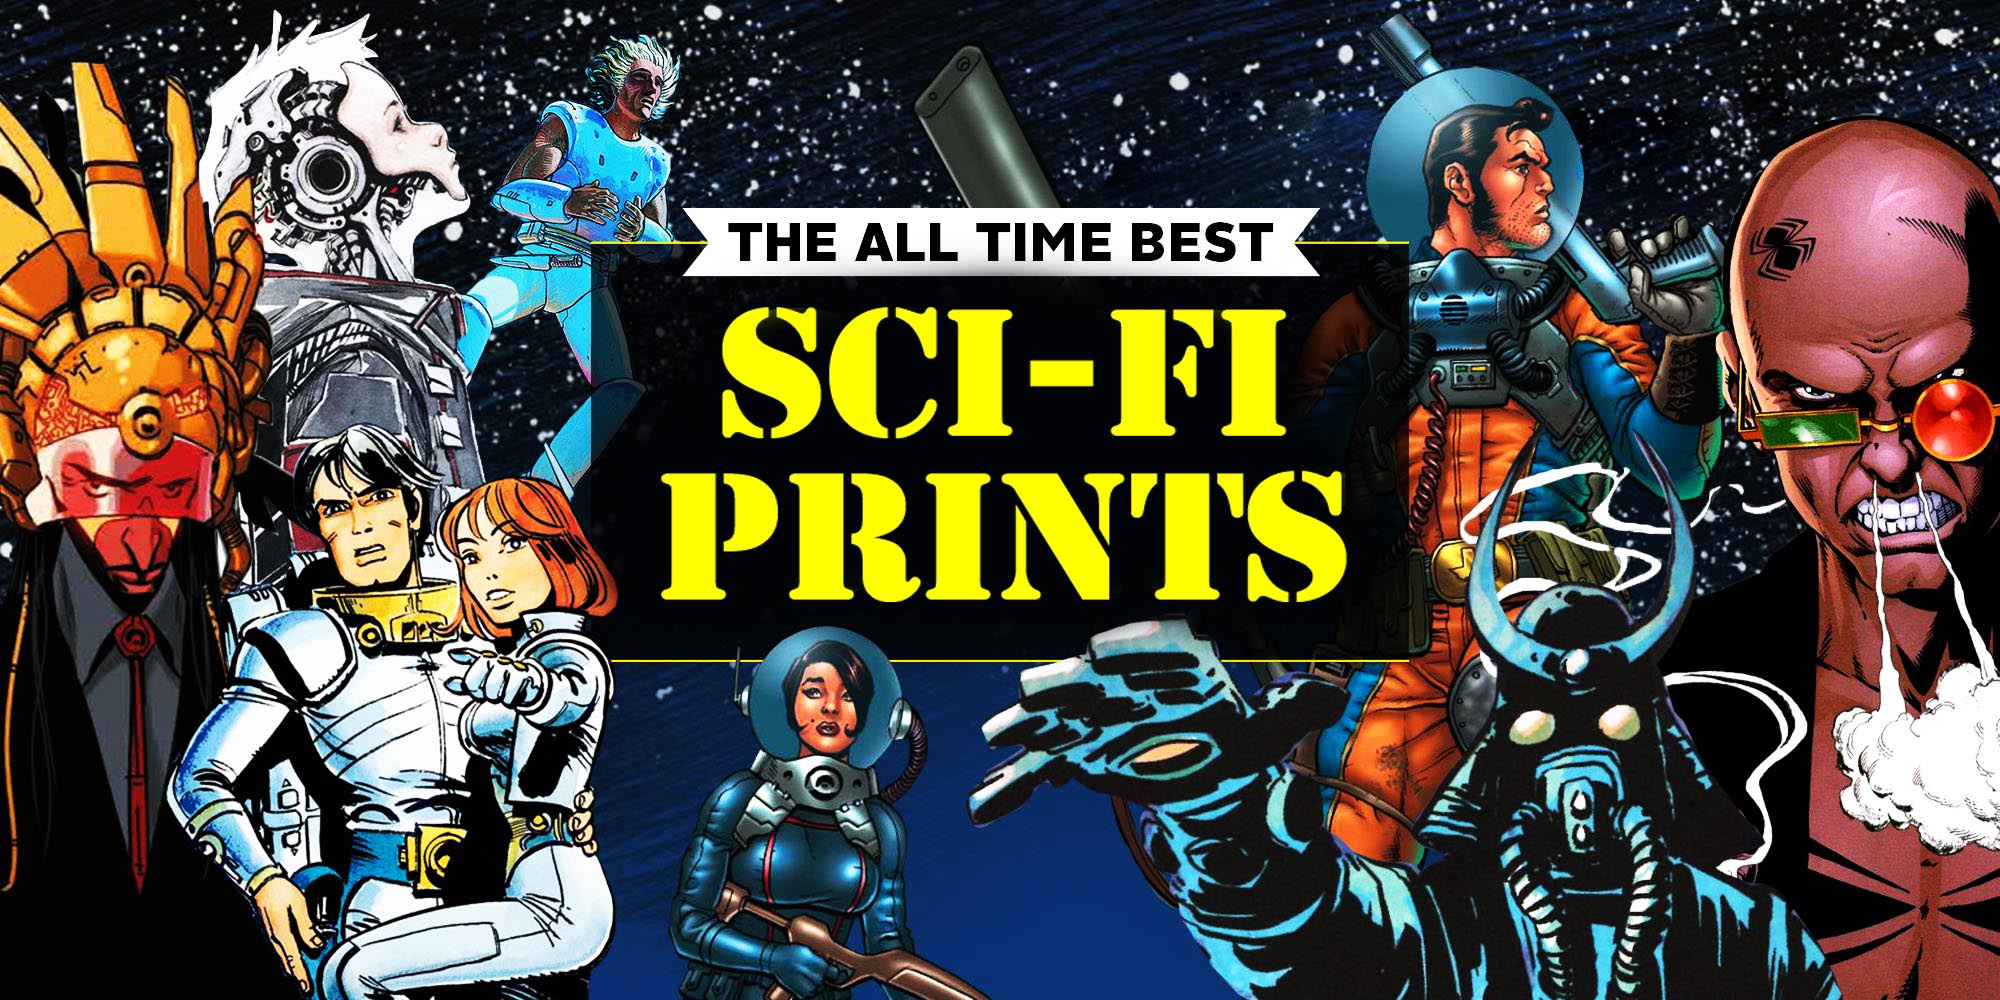 5 Most Popular Sci-fi Art Print Genres Of The Year